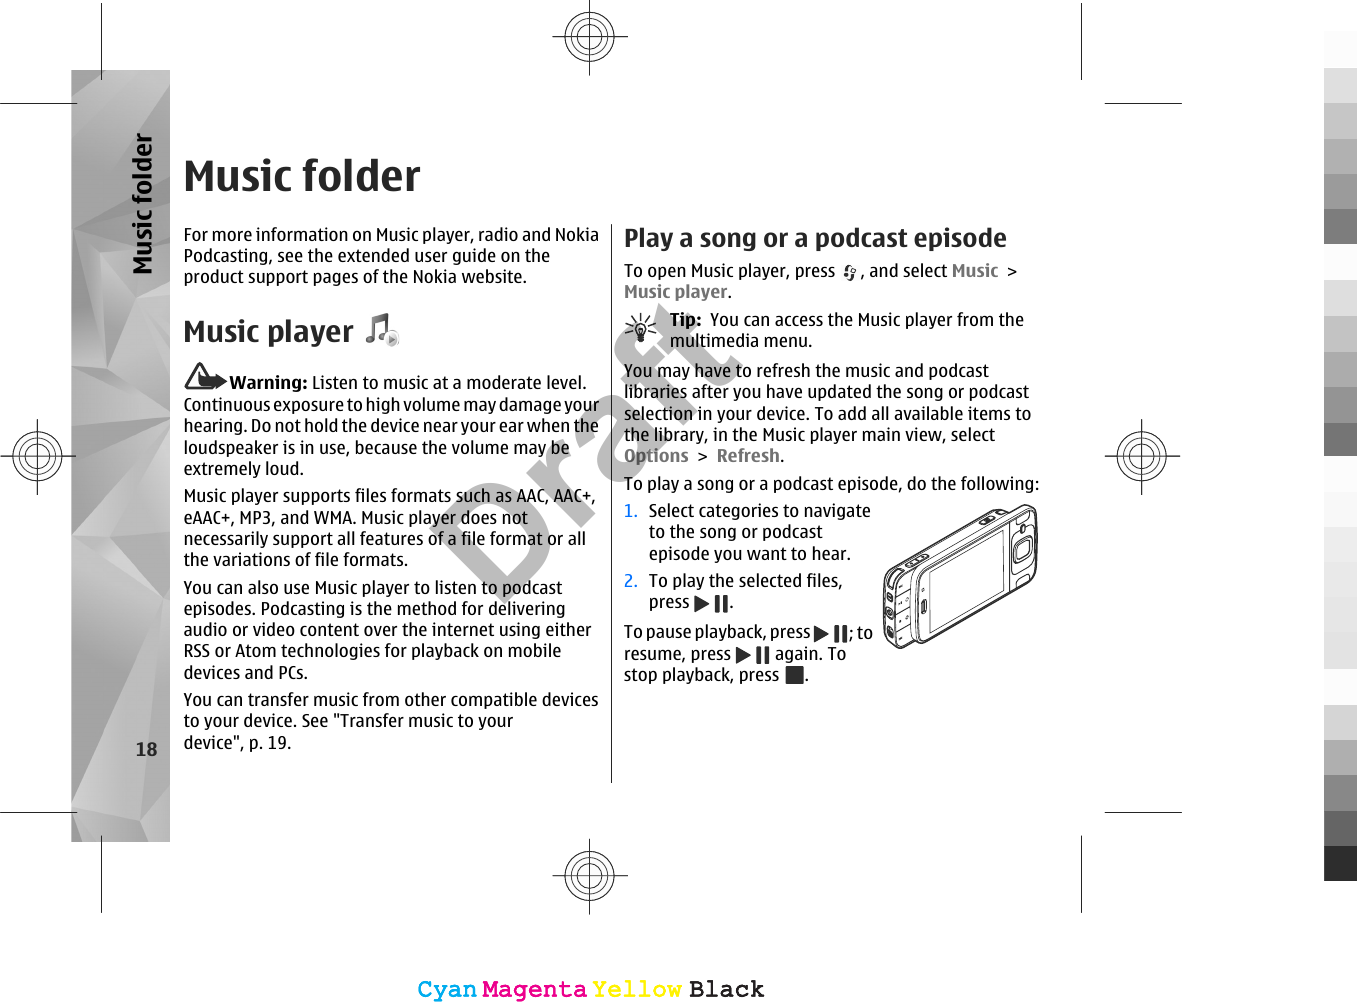 Music folderFor more information on Music player, radio and NokiaPodcasting, see the extended user guide on theproduct support pages of the Nokia website.Music playerWarning: Listen to music at a moderate level.Continuous exposure to high volume may damage yourhearing. Do not hold the device near your ear when theloudspeaker is in use, because the volume may beextremely loud.Music player supports files formats such as AAC, AAC+,eAAC+, MP3, and WMA. Music player does notnecessarily support all features of a file format or allthe variations of file formats.You can also use Music player to listen to podcastepisodes. Podcasting is the method for deliveringaudio or video content over the internet using eitherRSS or Atom technologies for playback on mobiledevices and PCs.You can transfer music from other compatible devicesto your device. See &quot;Transfer music to yourdevice&quot;, p. 19.Play a song or a podcast episodeTo open Music player, press  , and select Music &gt;Music player.Tip:  You can access the Music player from themultimedia menu.You may have to refresh the music and podcastlibraries after you have updated the song or podcastselection in your device. To add all available items tothe library, in the Music player main view, selectOptions &gt; Refresh.To play a song or a podcast episode, do the following:1. Select categories to navigateto the song or podcastepisode you want to hear.2. To play the selected files,press  .To pause playback, press  ; toresume, press   again. Tostop playback, press  .18Music folderCyanCyanMagentaMagentaYellowYellowBlackBlackCyanCyanMagentaMagentaYellowYellowBlackBlackDraft